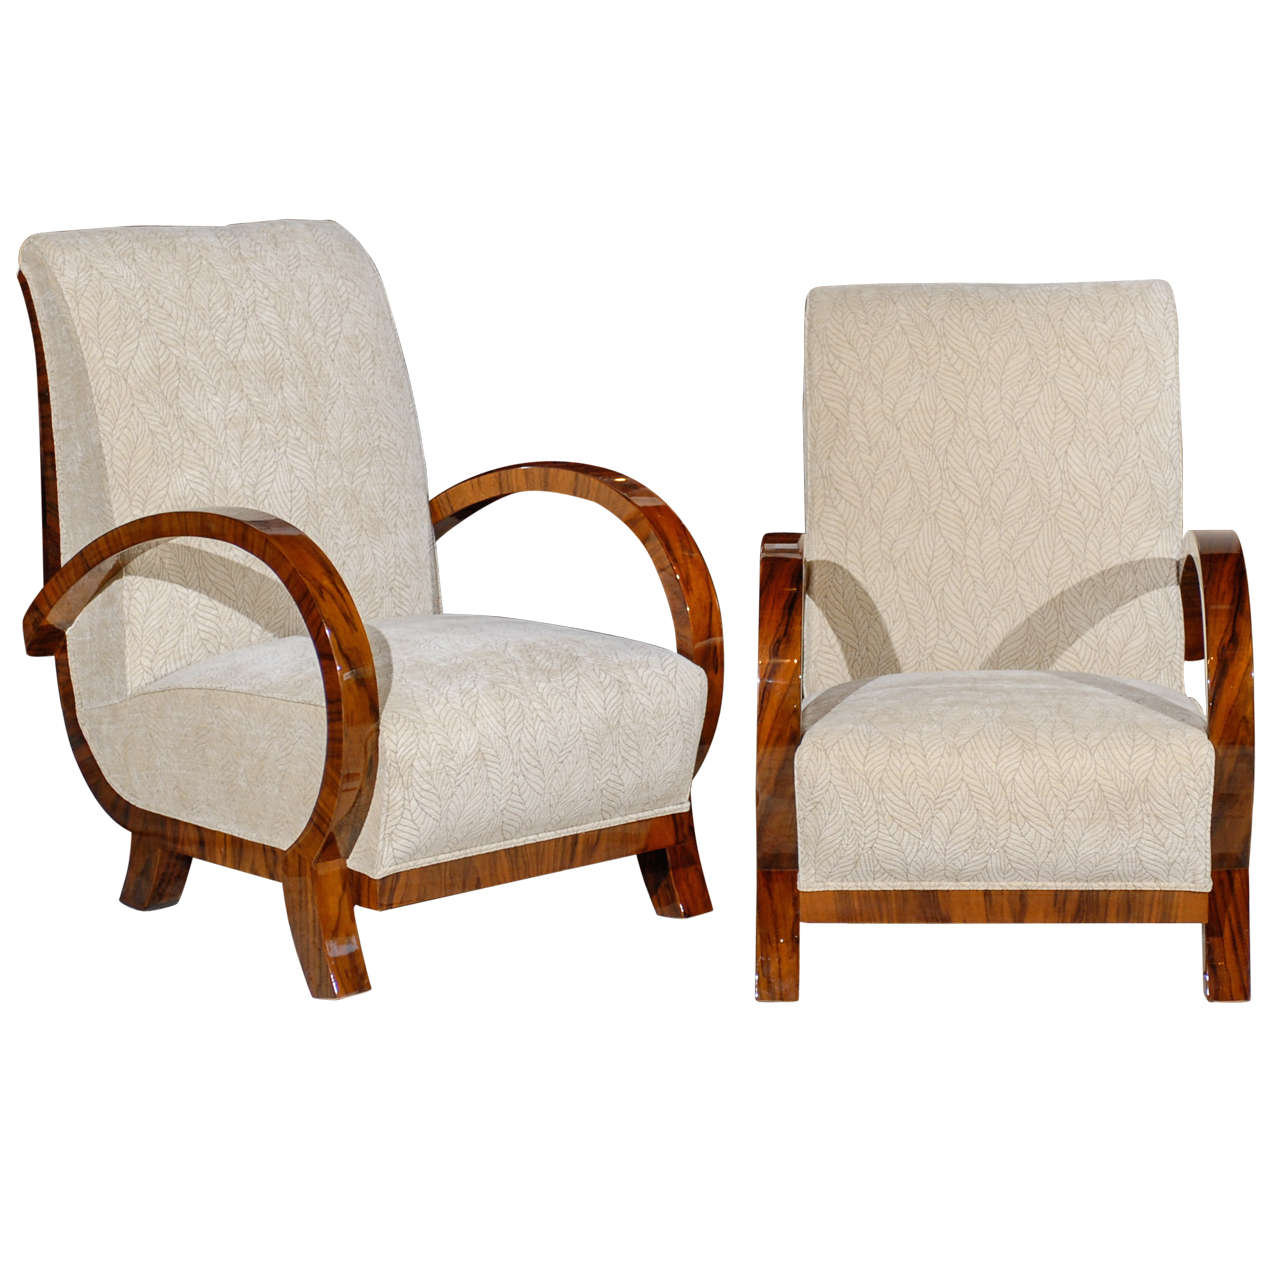 Pair of Curved Arm Art Deco Chairs